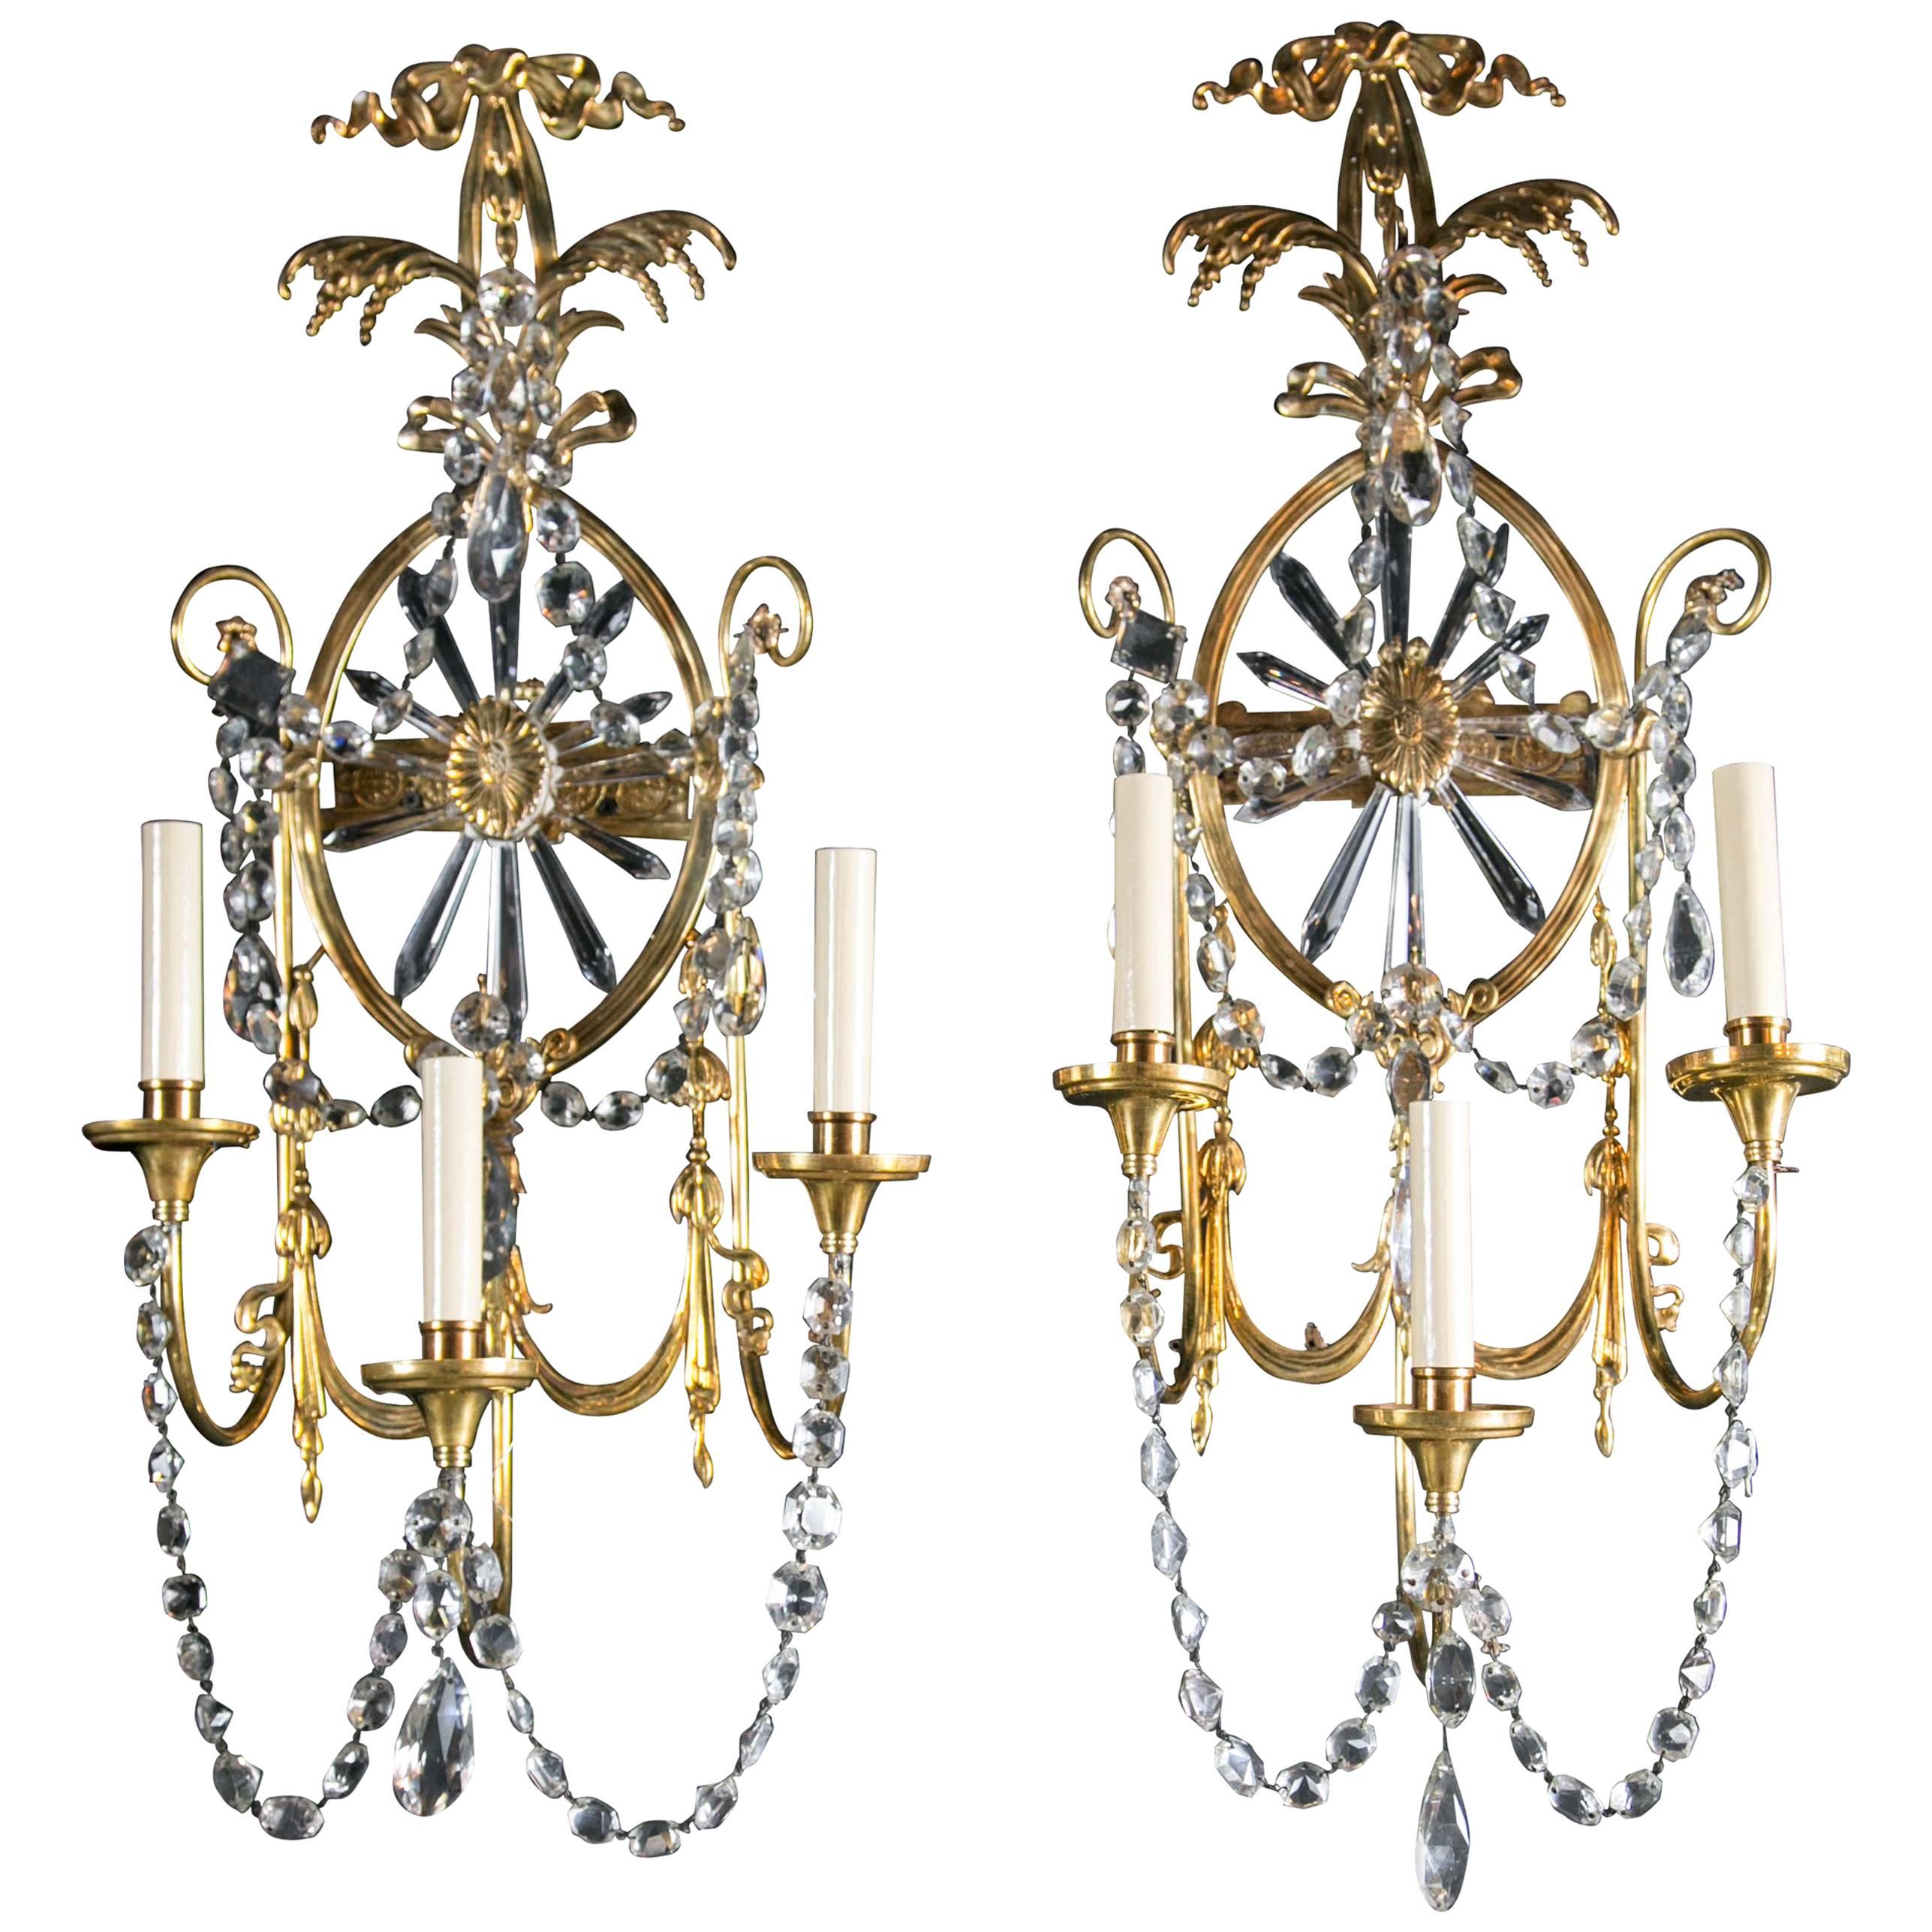 Pair of Large 1920 Caldwell Three-light Sconces with Sunburst Shaped Crystal For Sale